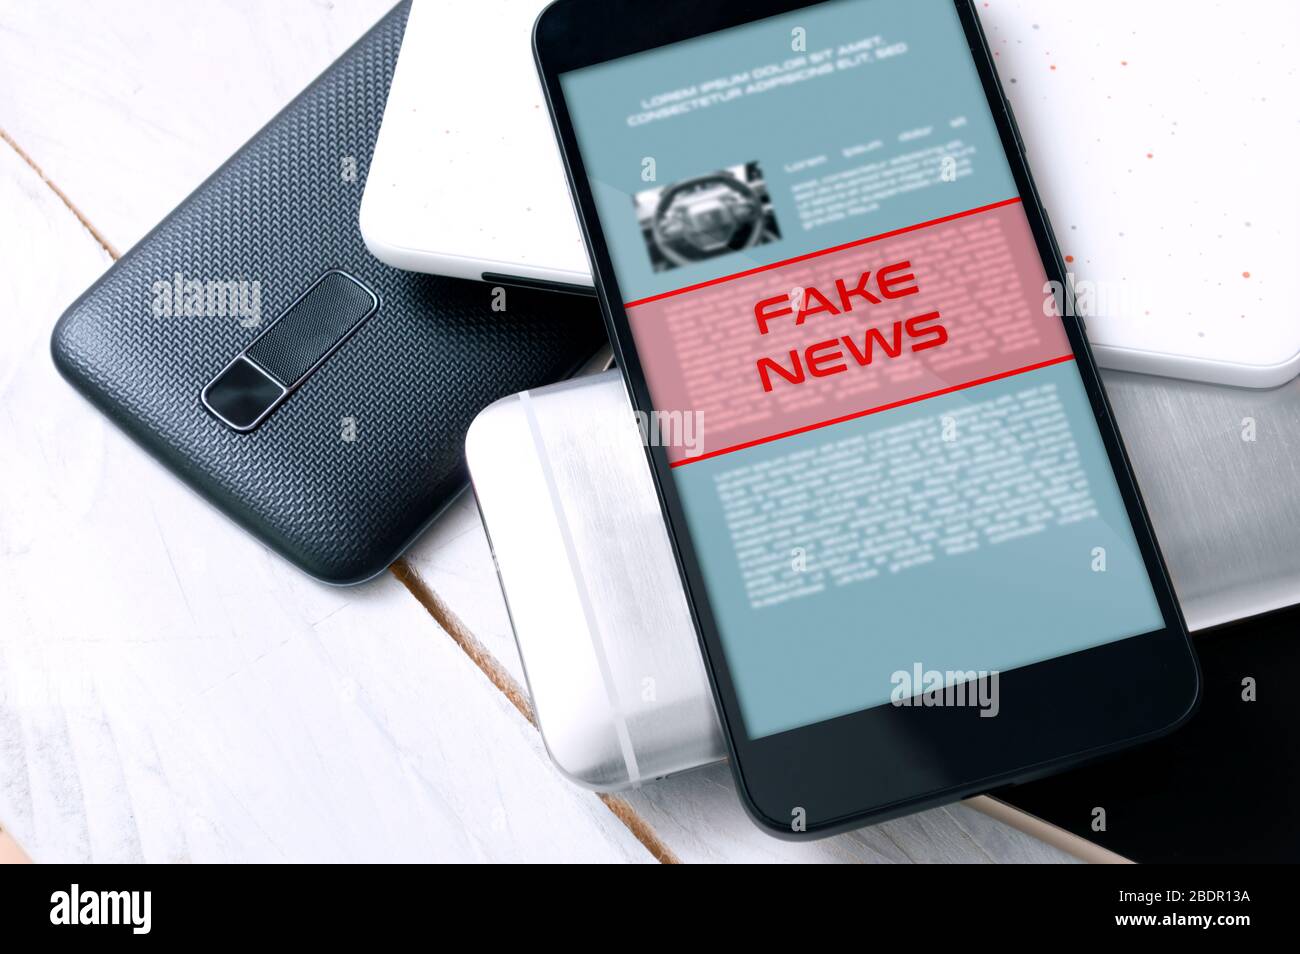 Stack of smartphones with 'fake news' alert on the top one. Conception of increasing level of fake news. Stock Photo